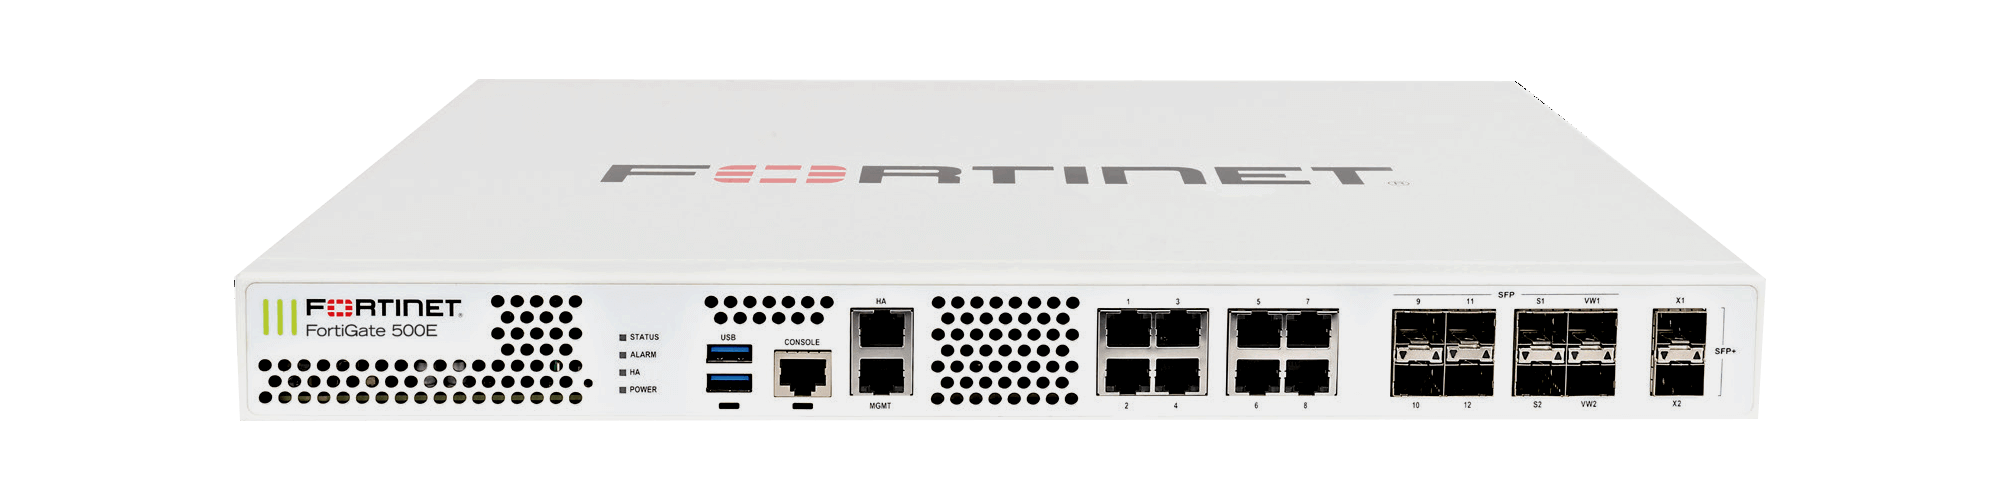 Fortinet FortiGate 500E Firewall (End of Sale/Life)